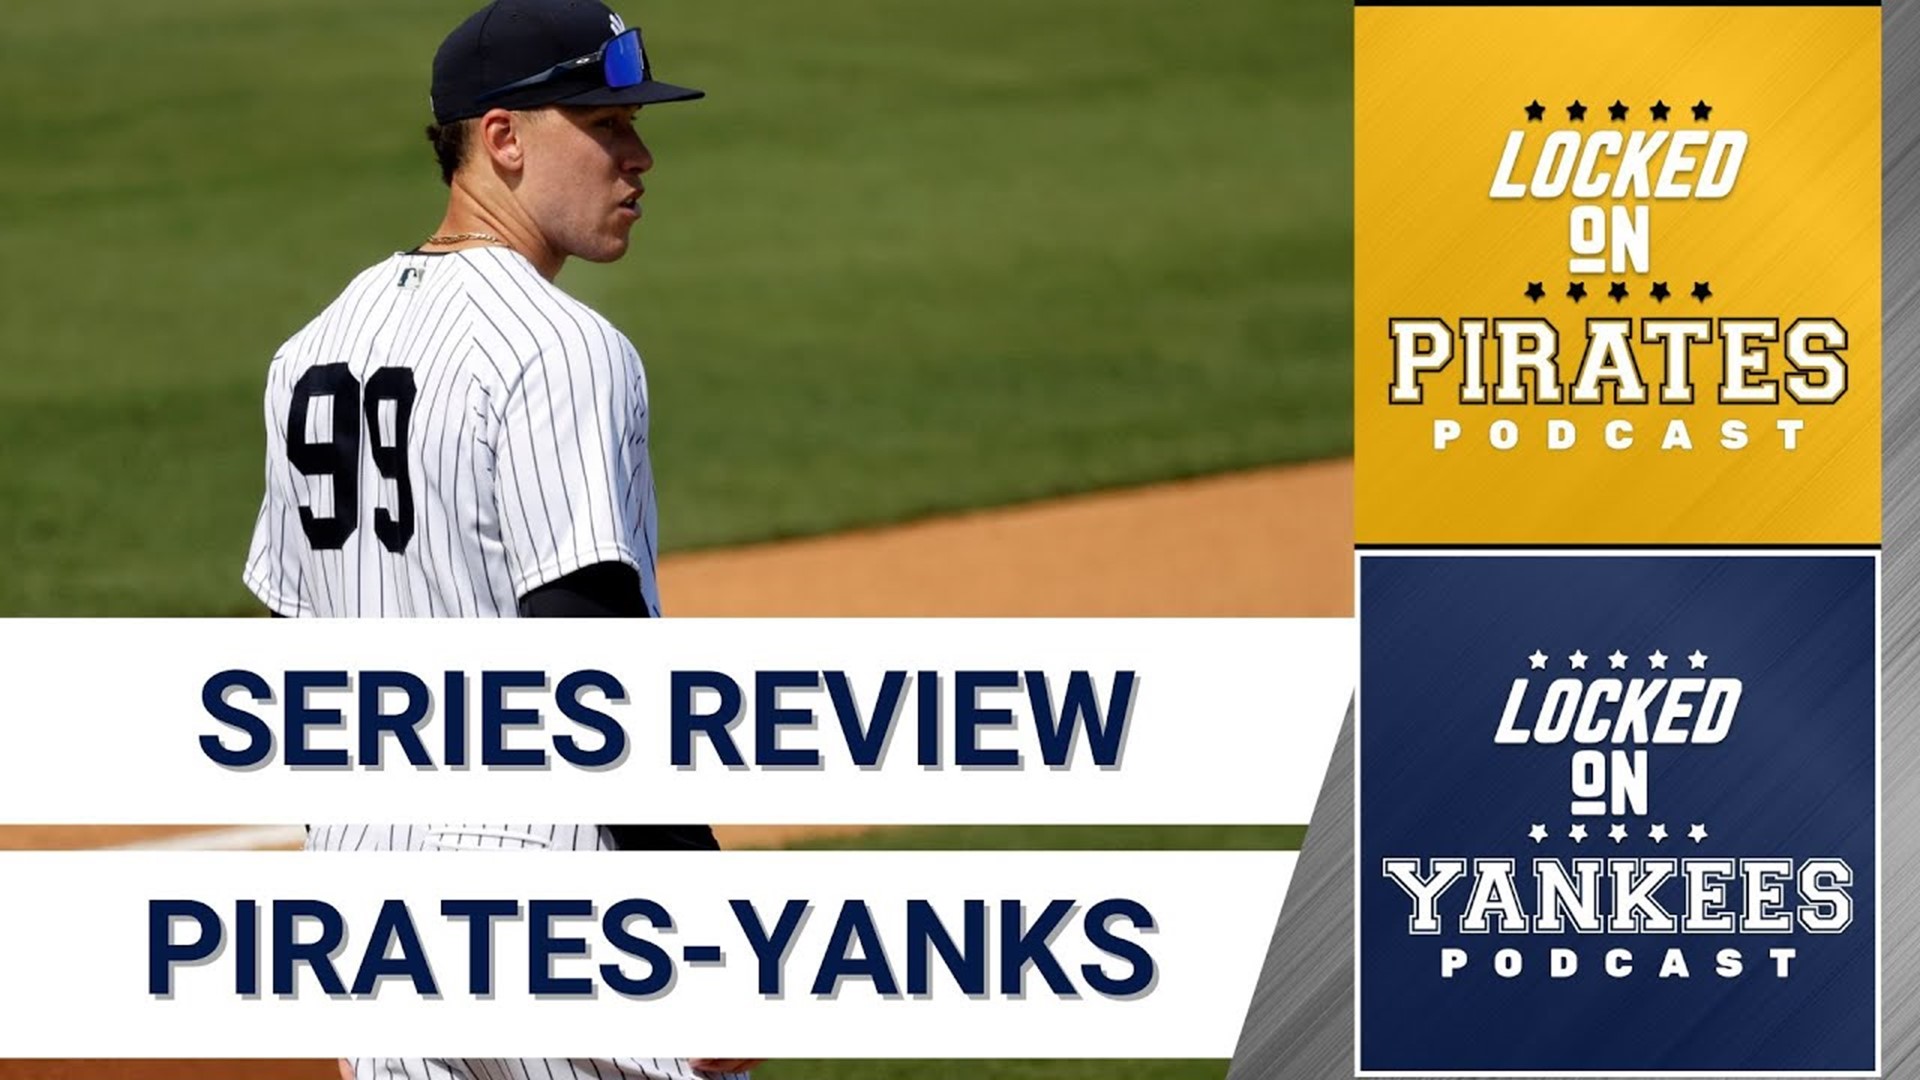 Stacey Gotsulias of Locked On Yankees and Ethan Smith of Locked On PIrates review the series the Yankees and Pirates played this week.